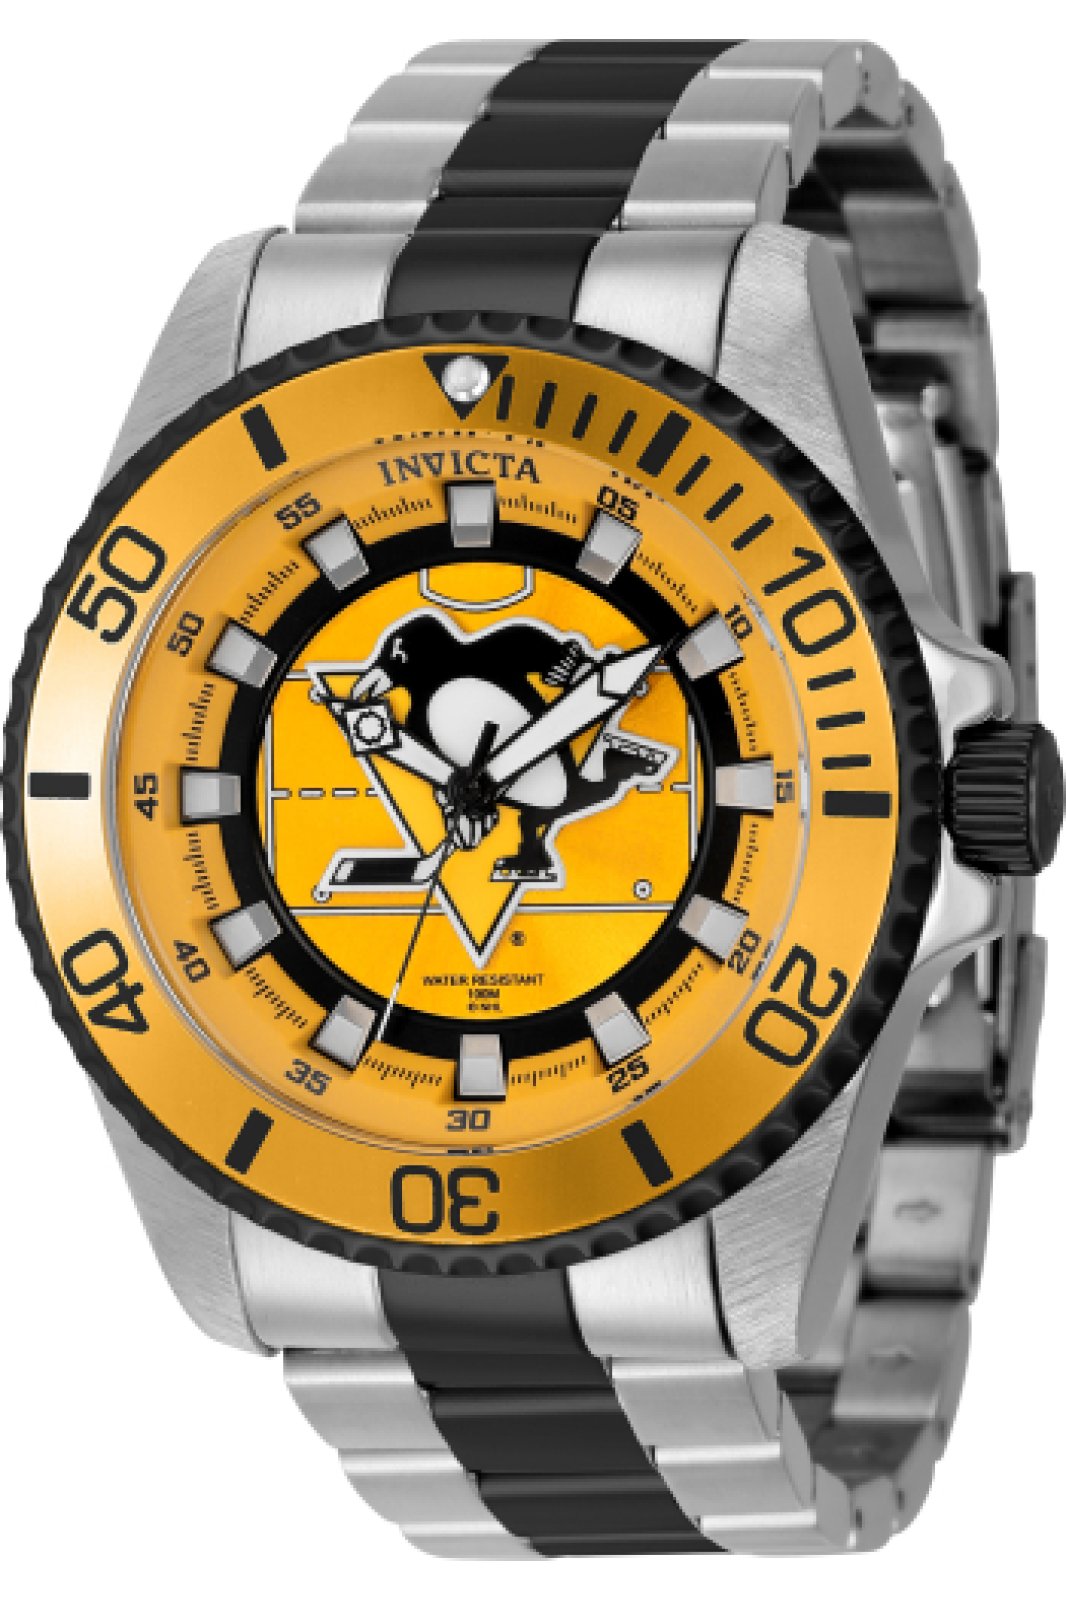 Invicta Watch NHL - Pittsburgh Penguins 42242 - Official Invicta Store